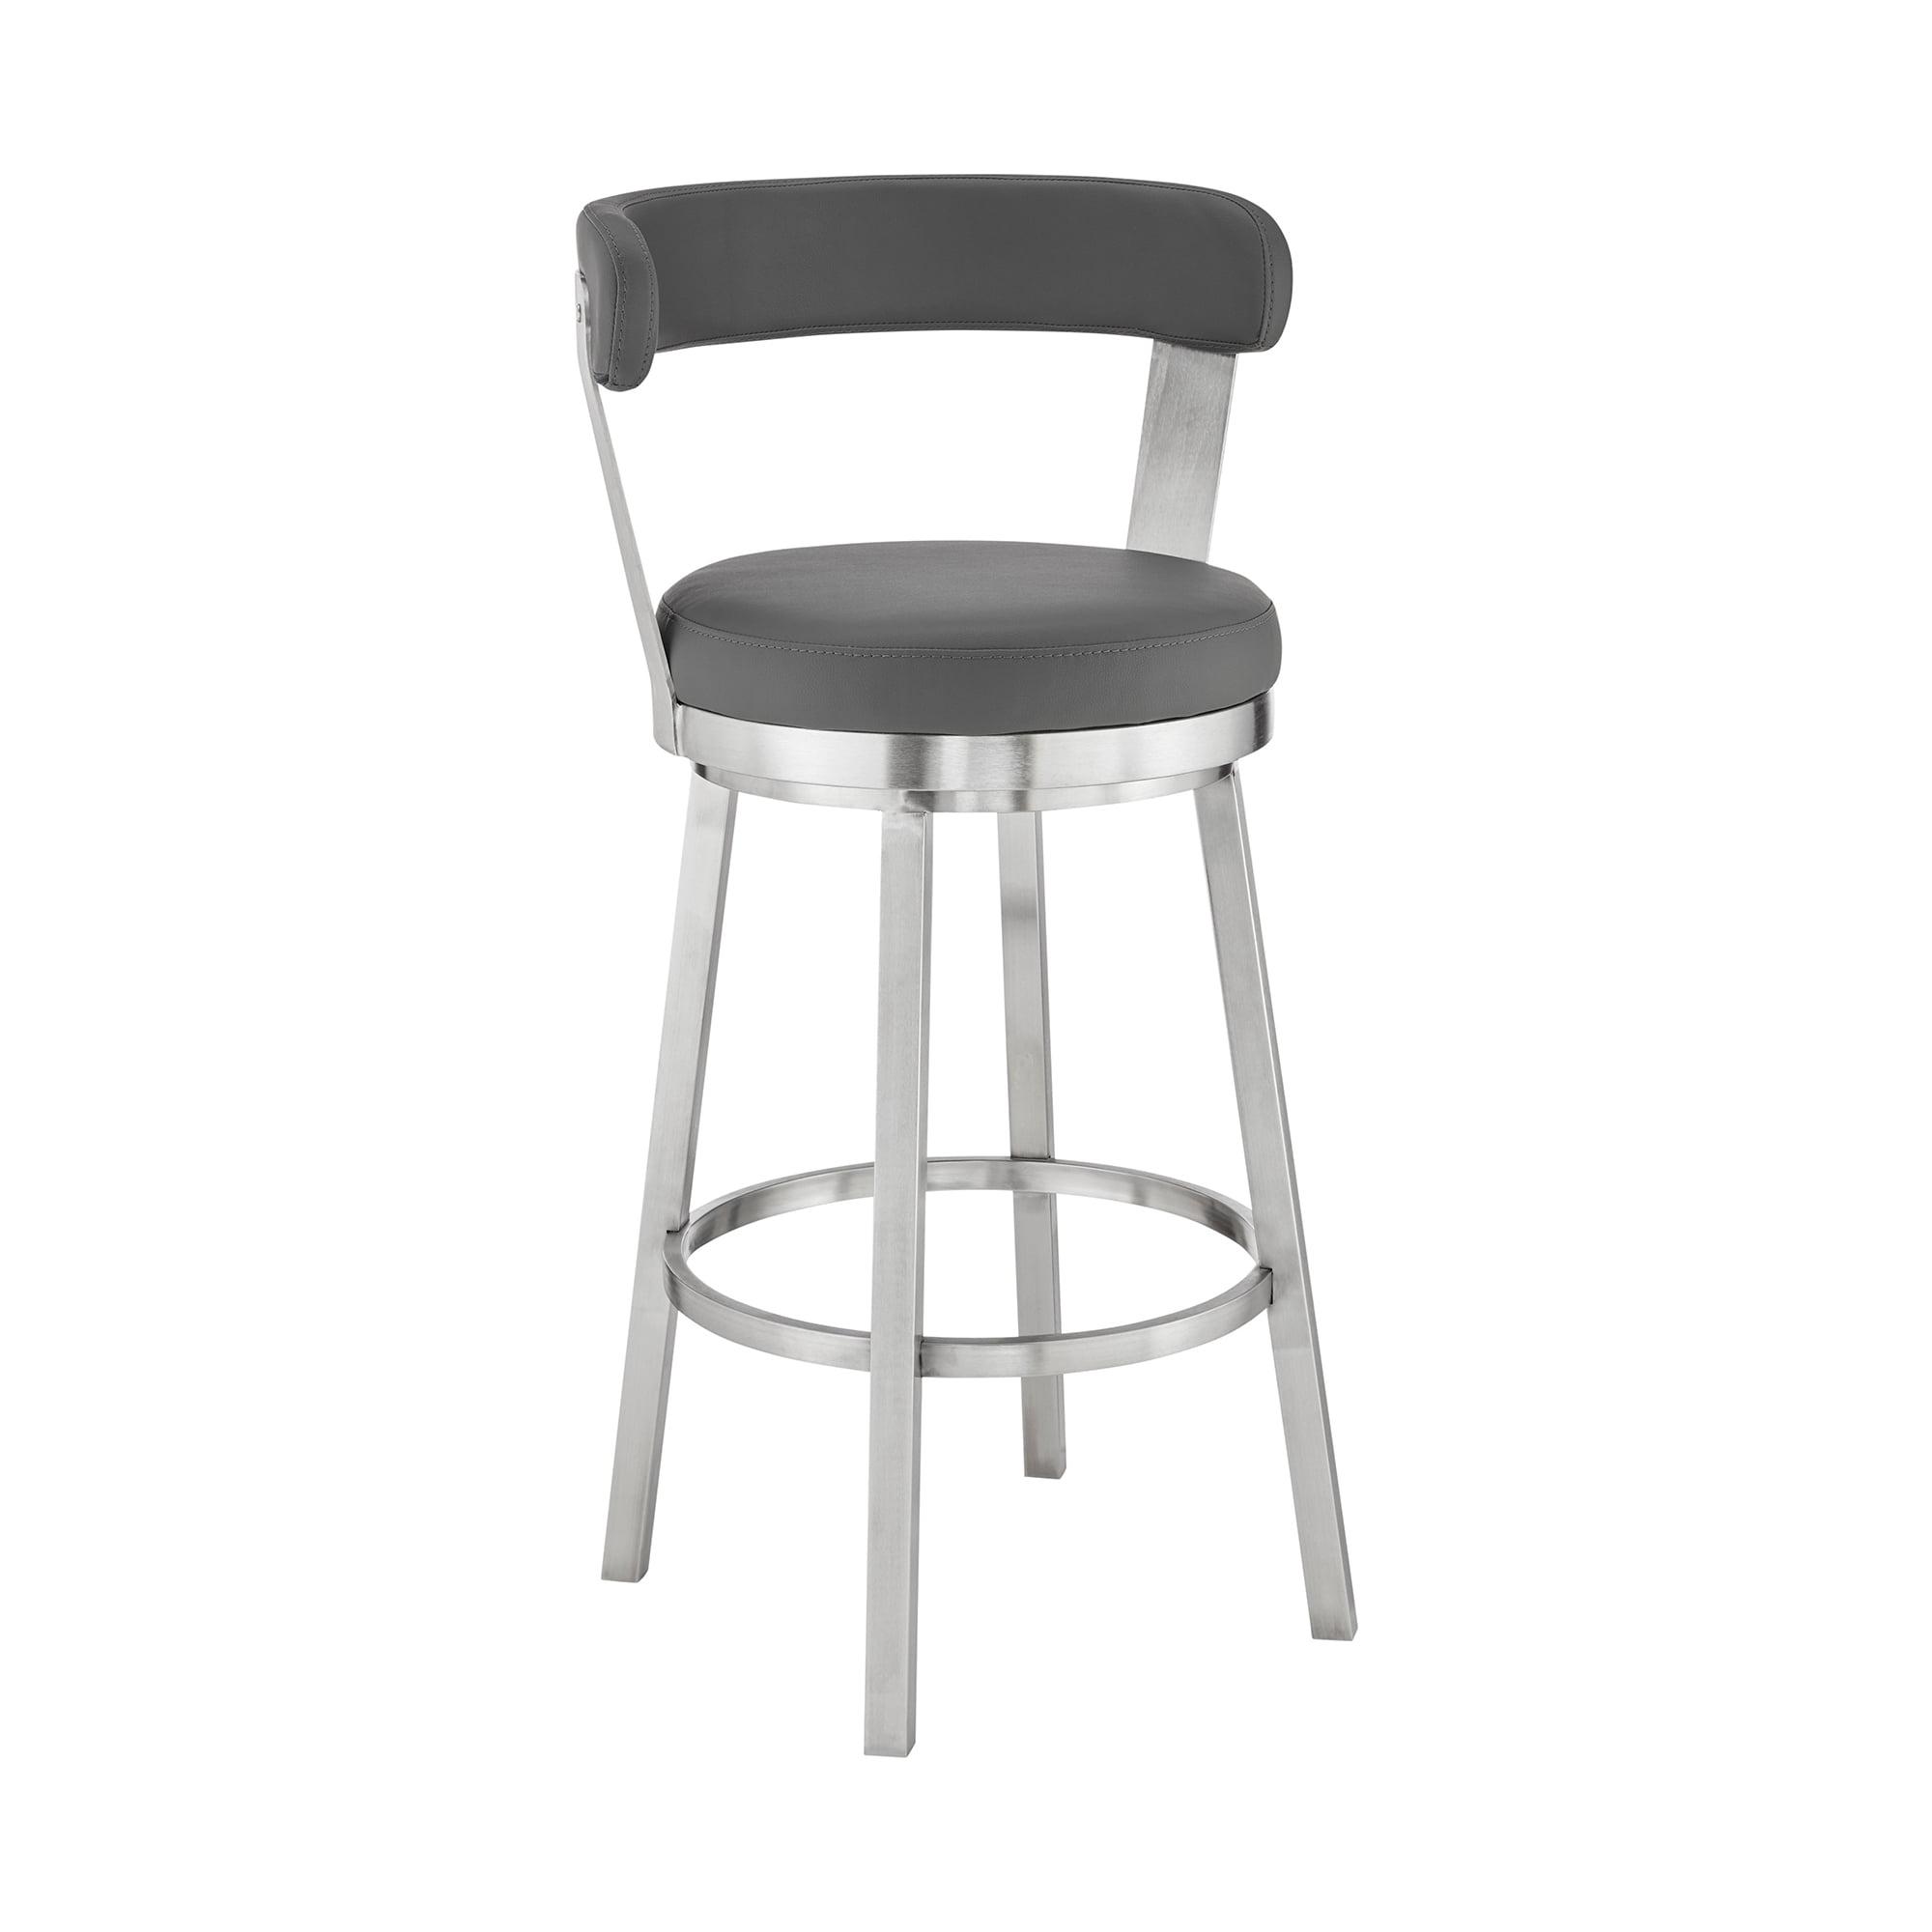 Gray Faux Leather Adjustable Swivel Bar Stool with Metal Frame